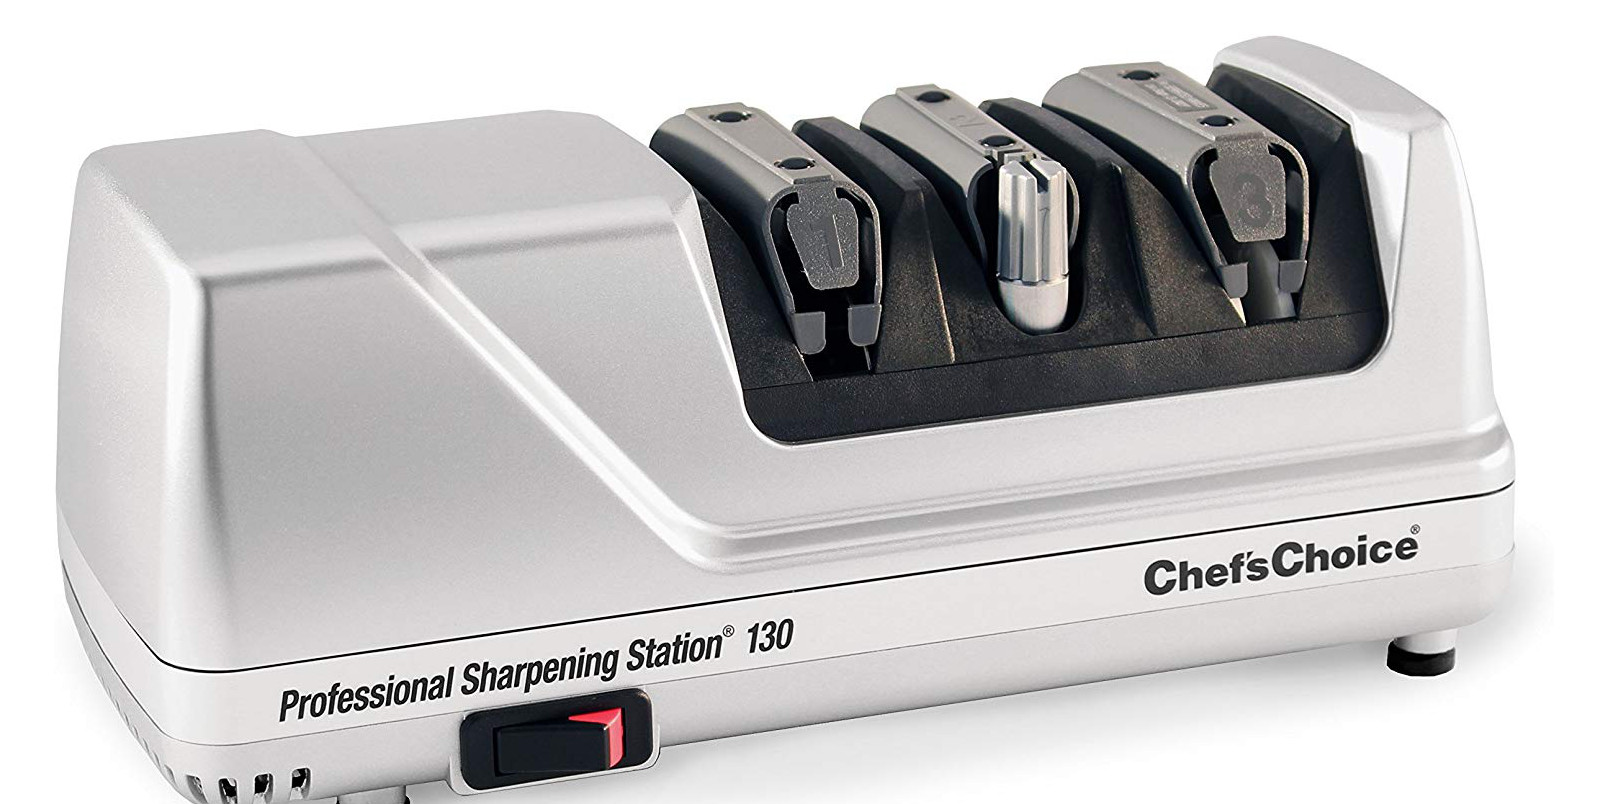 https://9to5toys.com/wp-content/uploads/sites/5/2020/01/Edgecraft-Chef%E2%80%99sChoice-130-Professional-Electric-Knife-Sharpening-Station.jpg